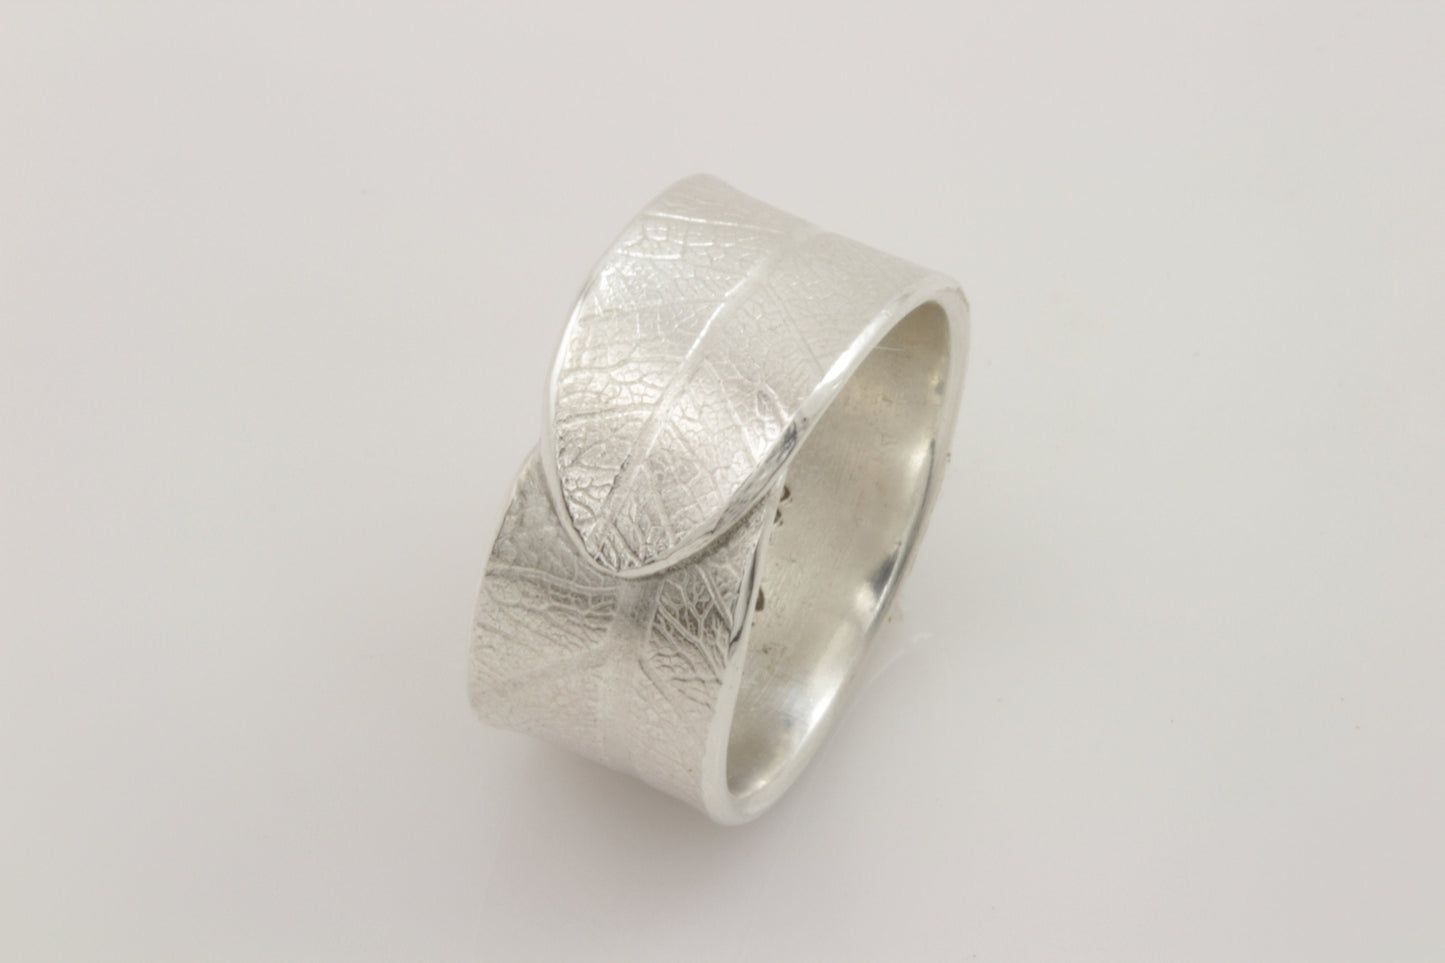 Overlapping Bodhi Leaf Ring